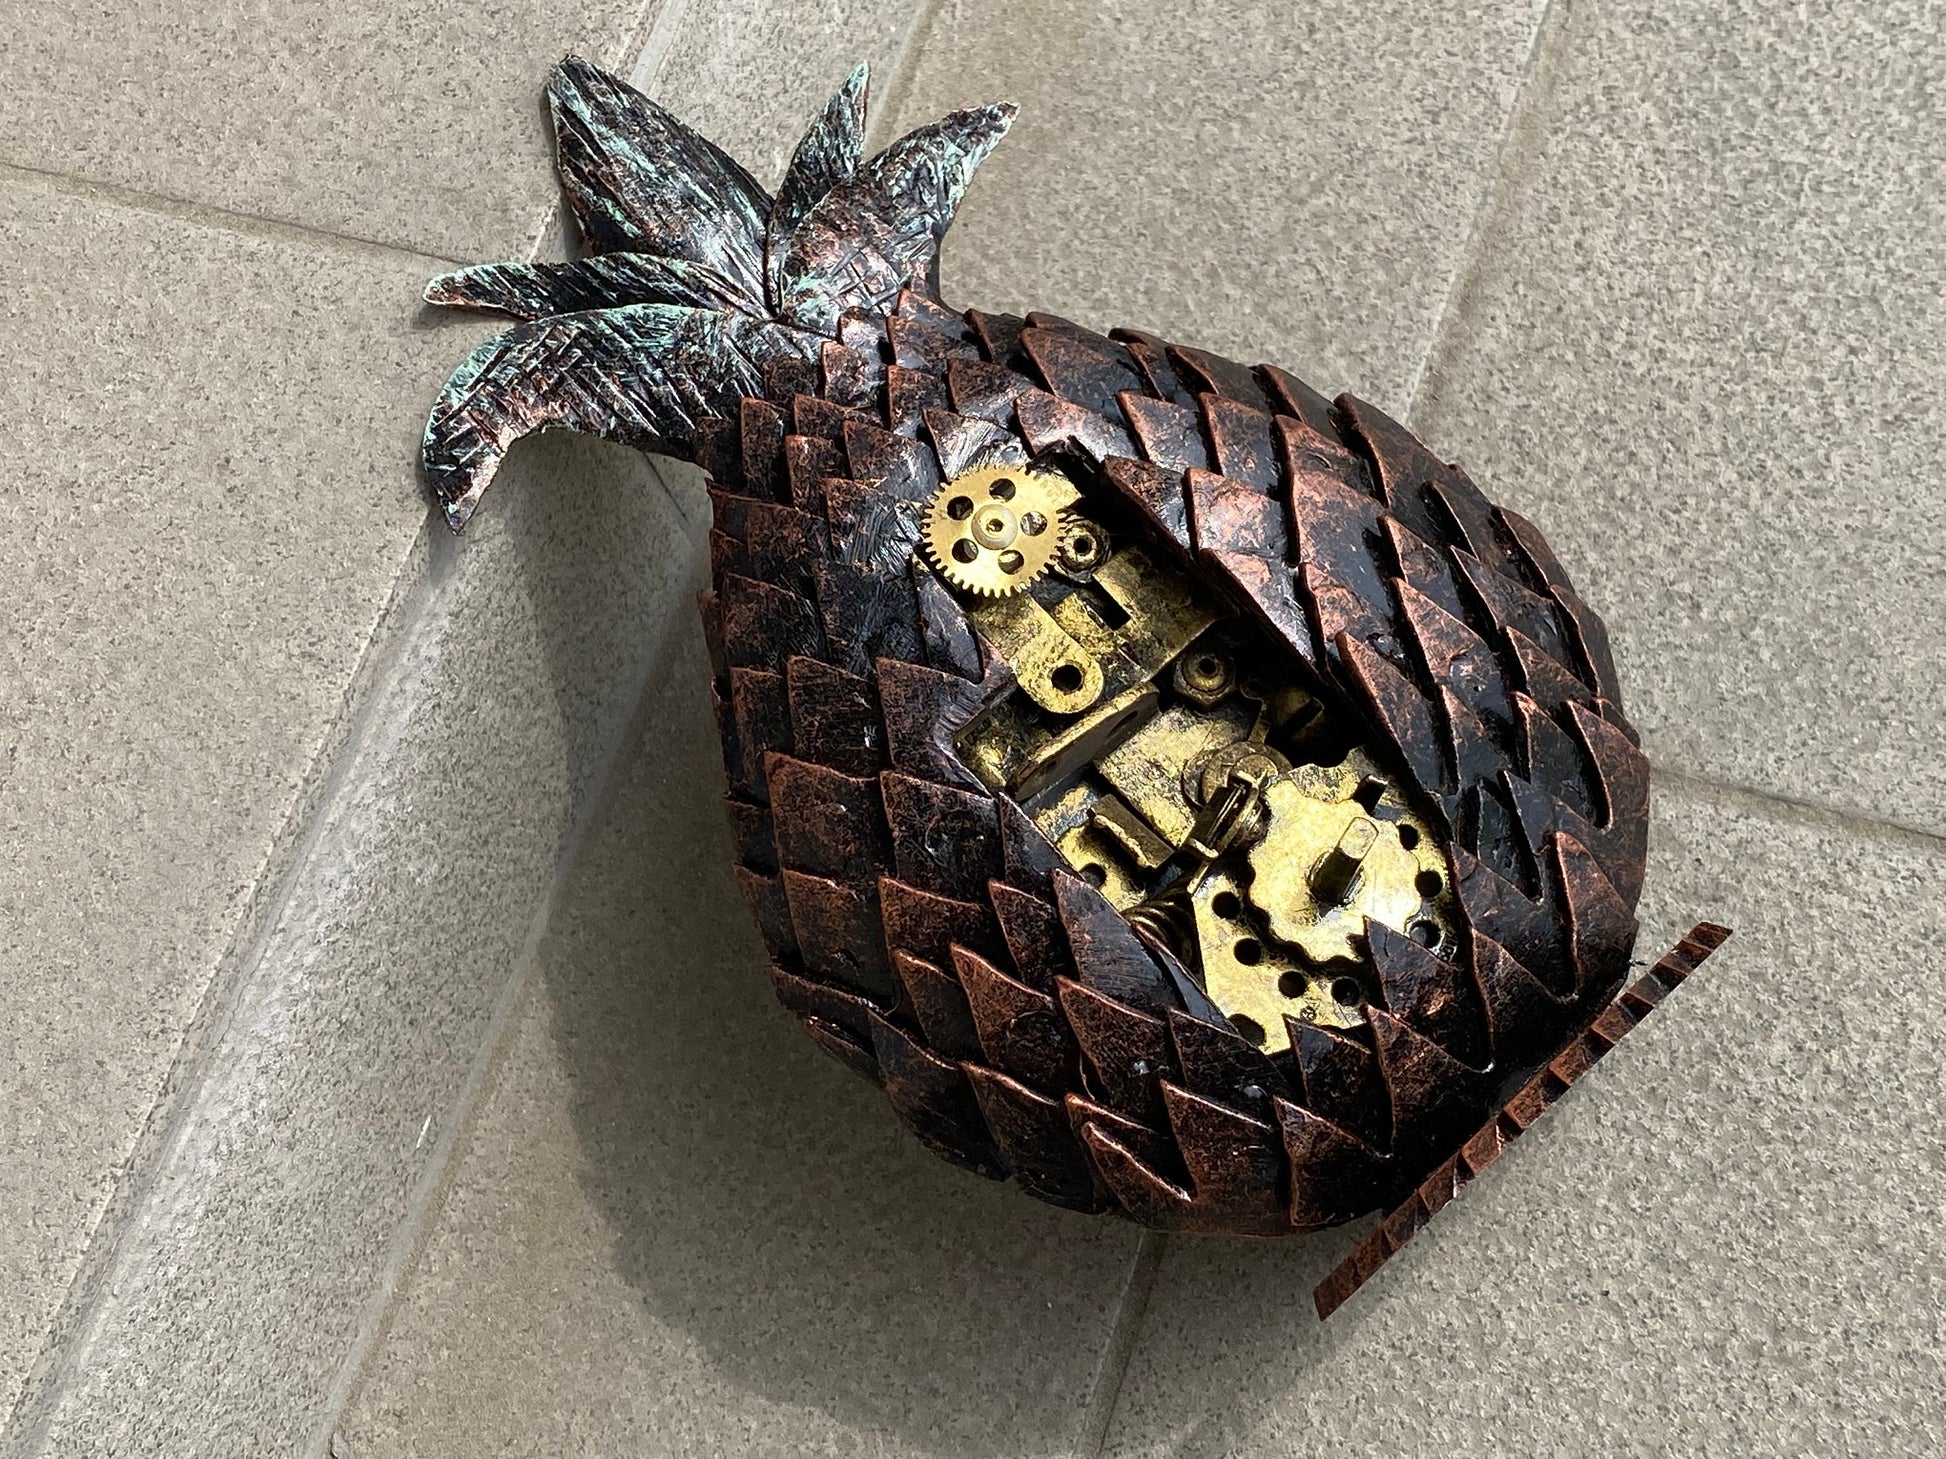 Steampunk pineapple, pineapple, steampunk, pine apple, fruit, Christmas, birthday, hardware, steam punk, recycling, industrial, exotic, mom